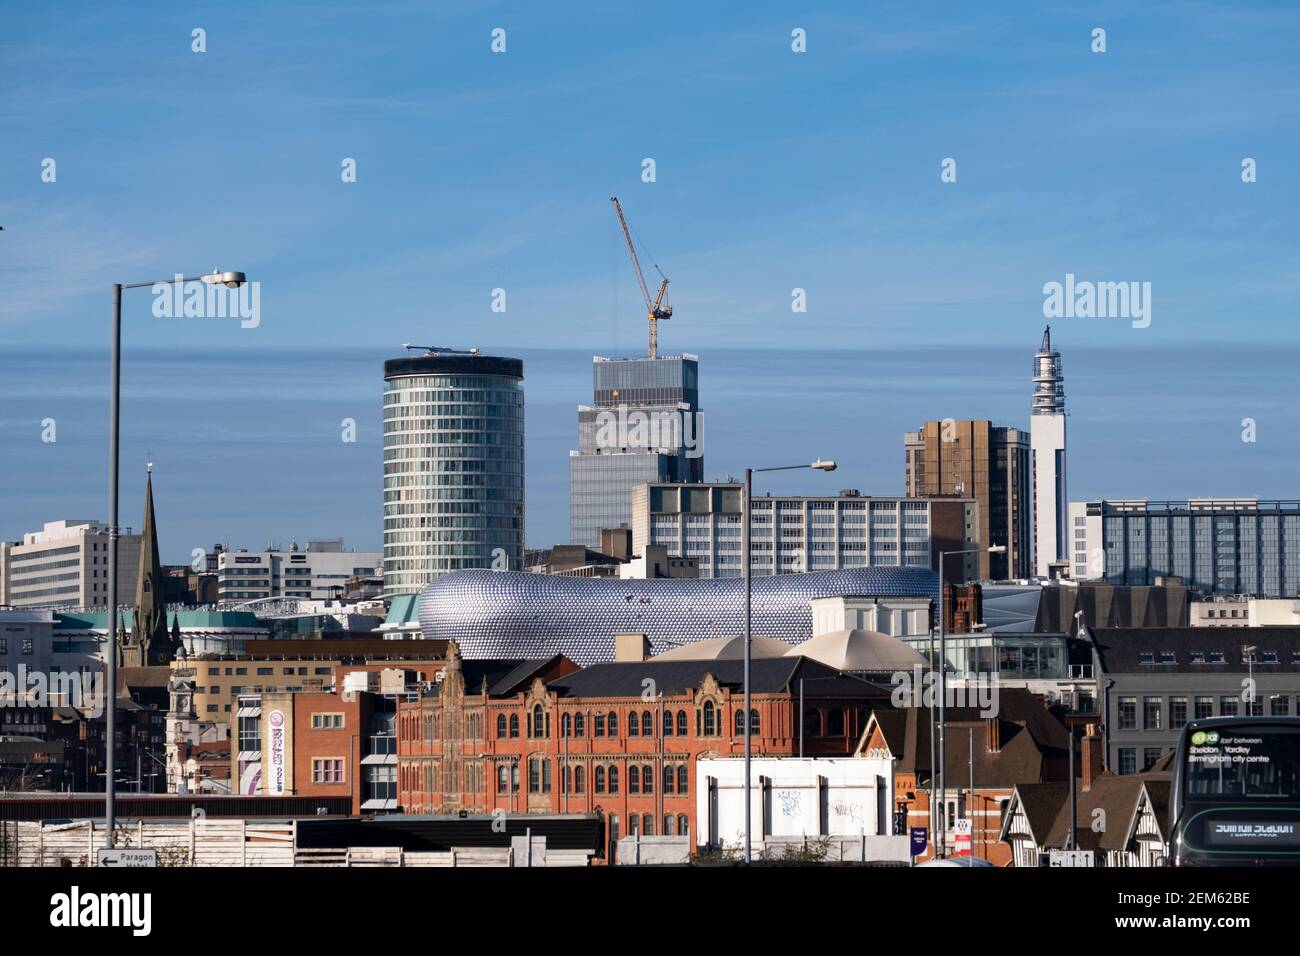 A view of Birmingham City Centre, West Midlands, UK showing the commercial area. Stock Photo